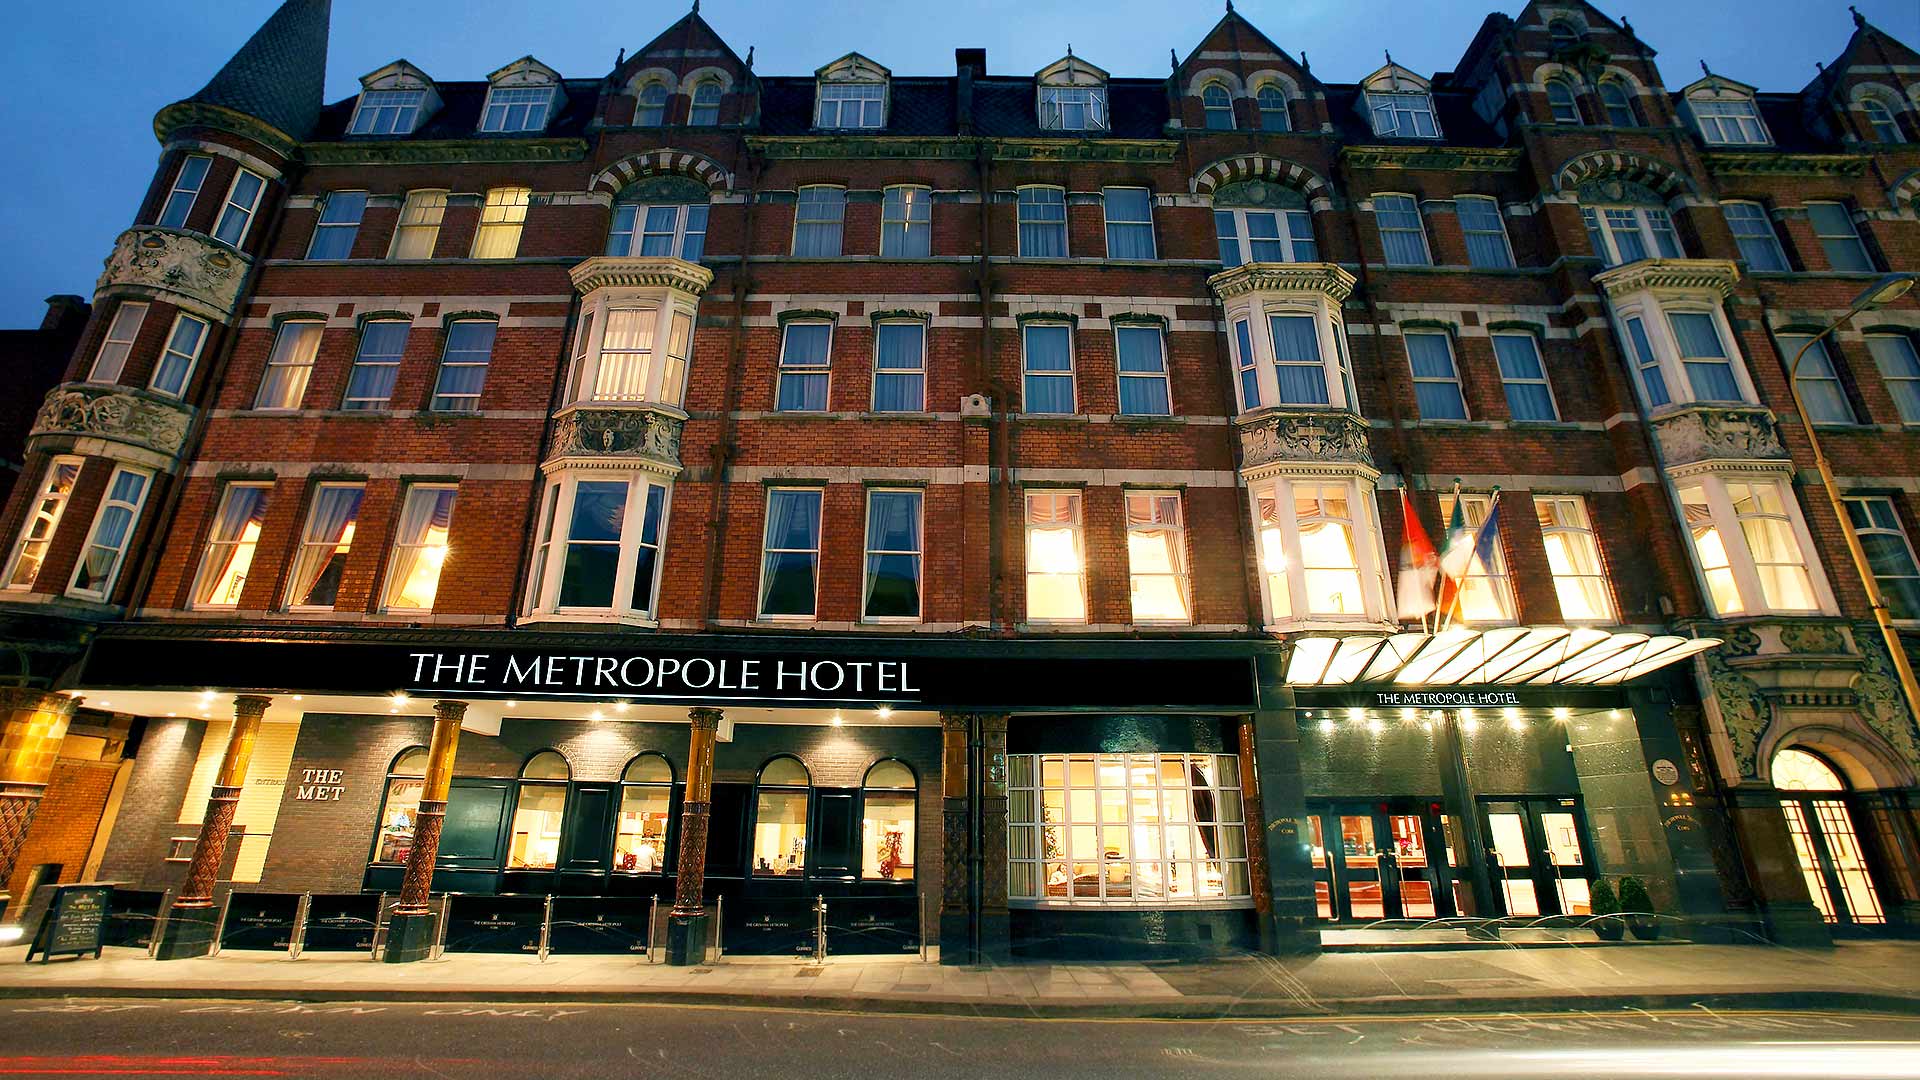 Outside building image of The Metropole Hotel